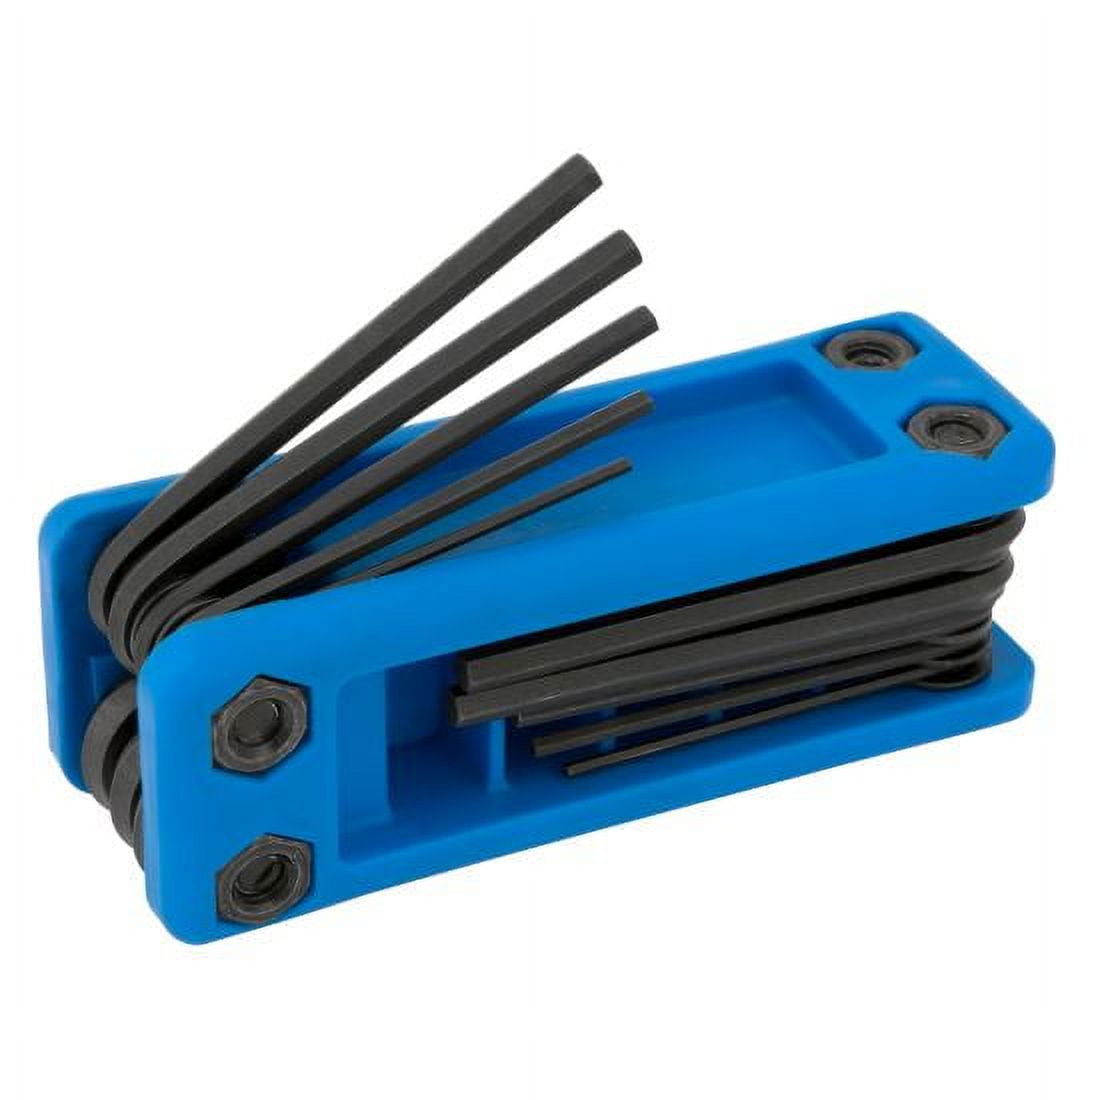 2796977 17 Piece Metric Fold-up Hex Key Set, Pack Of 6